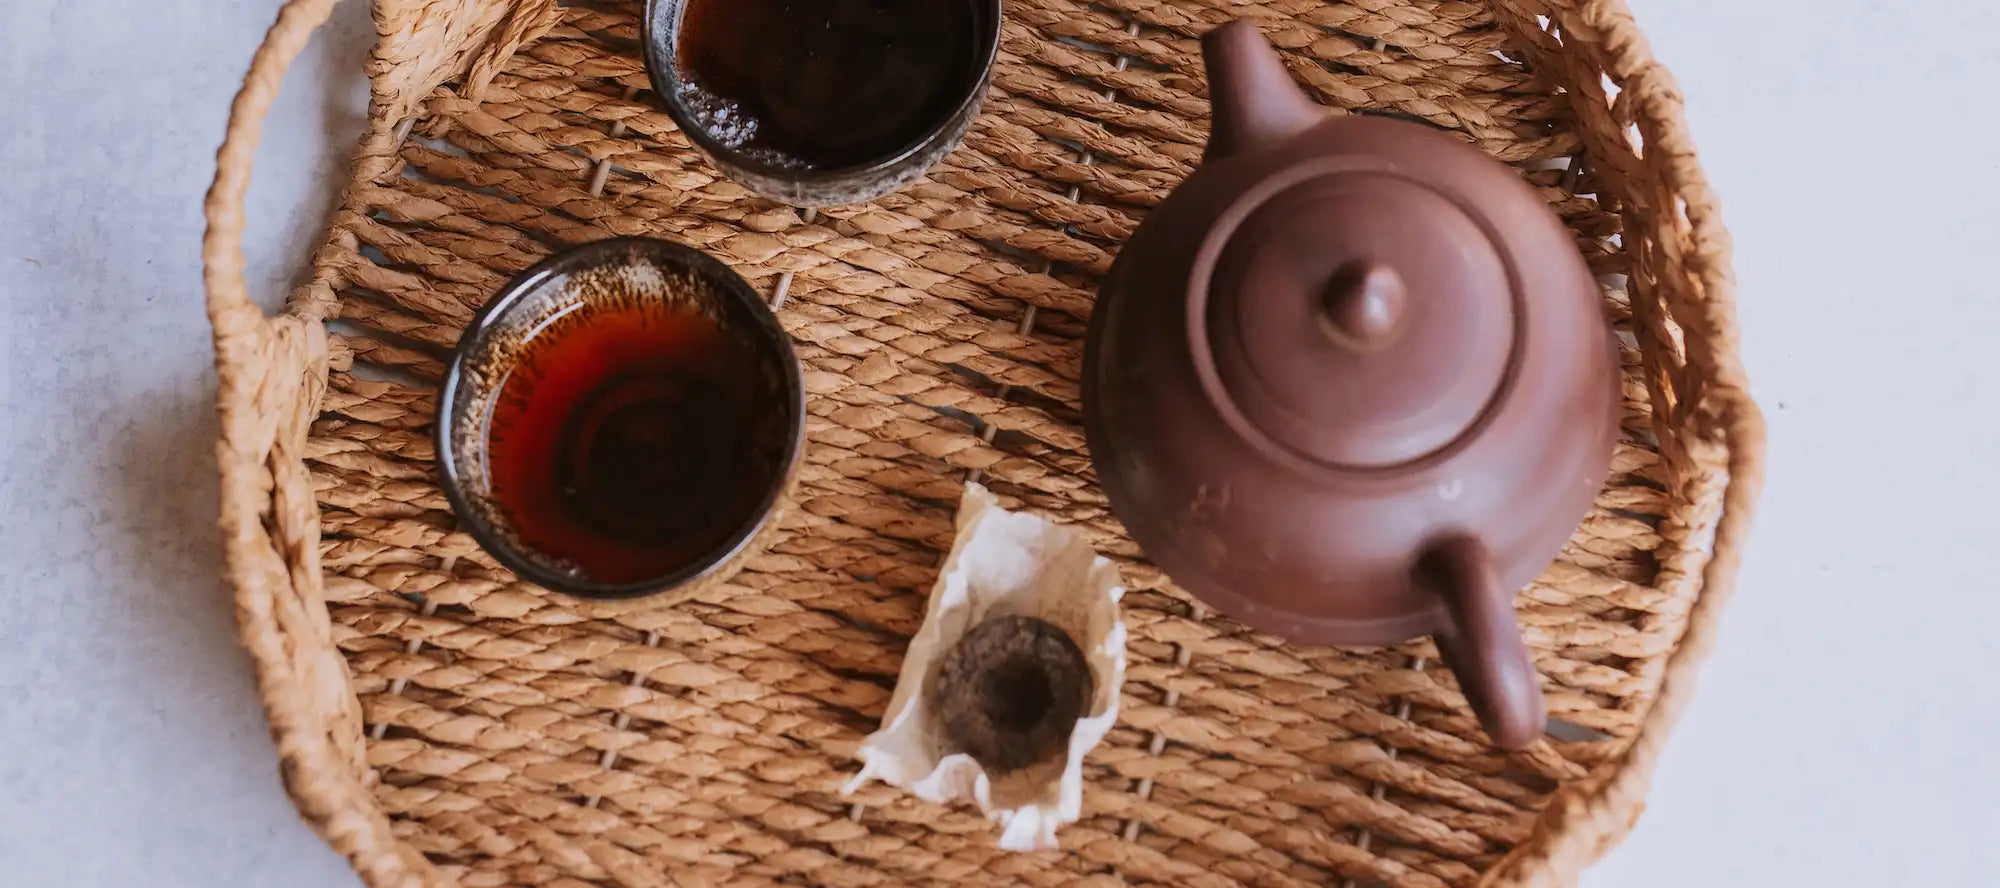 yixing pot with brewed small cups of aged tea and a tuocha (nest) of shou pu erh